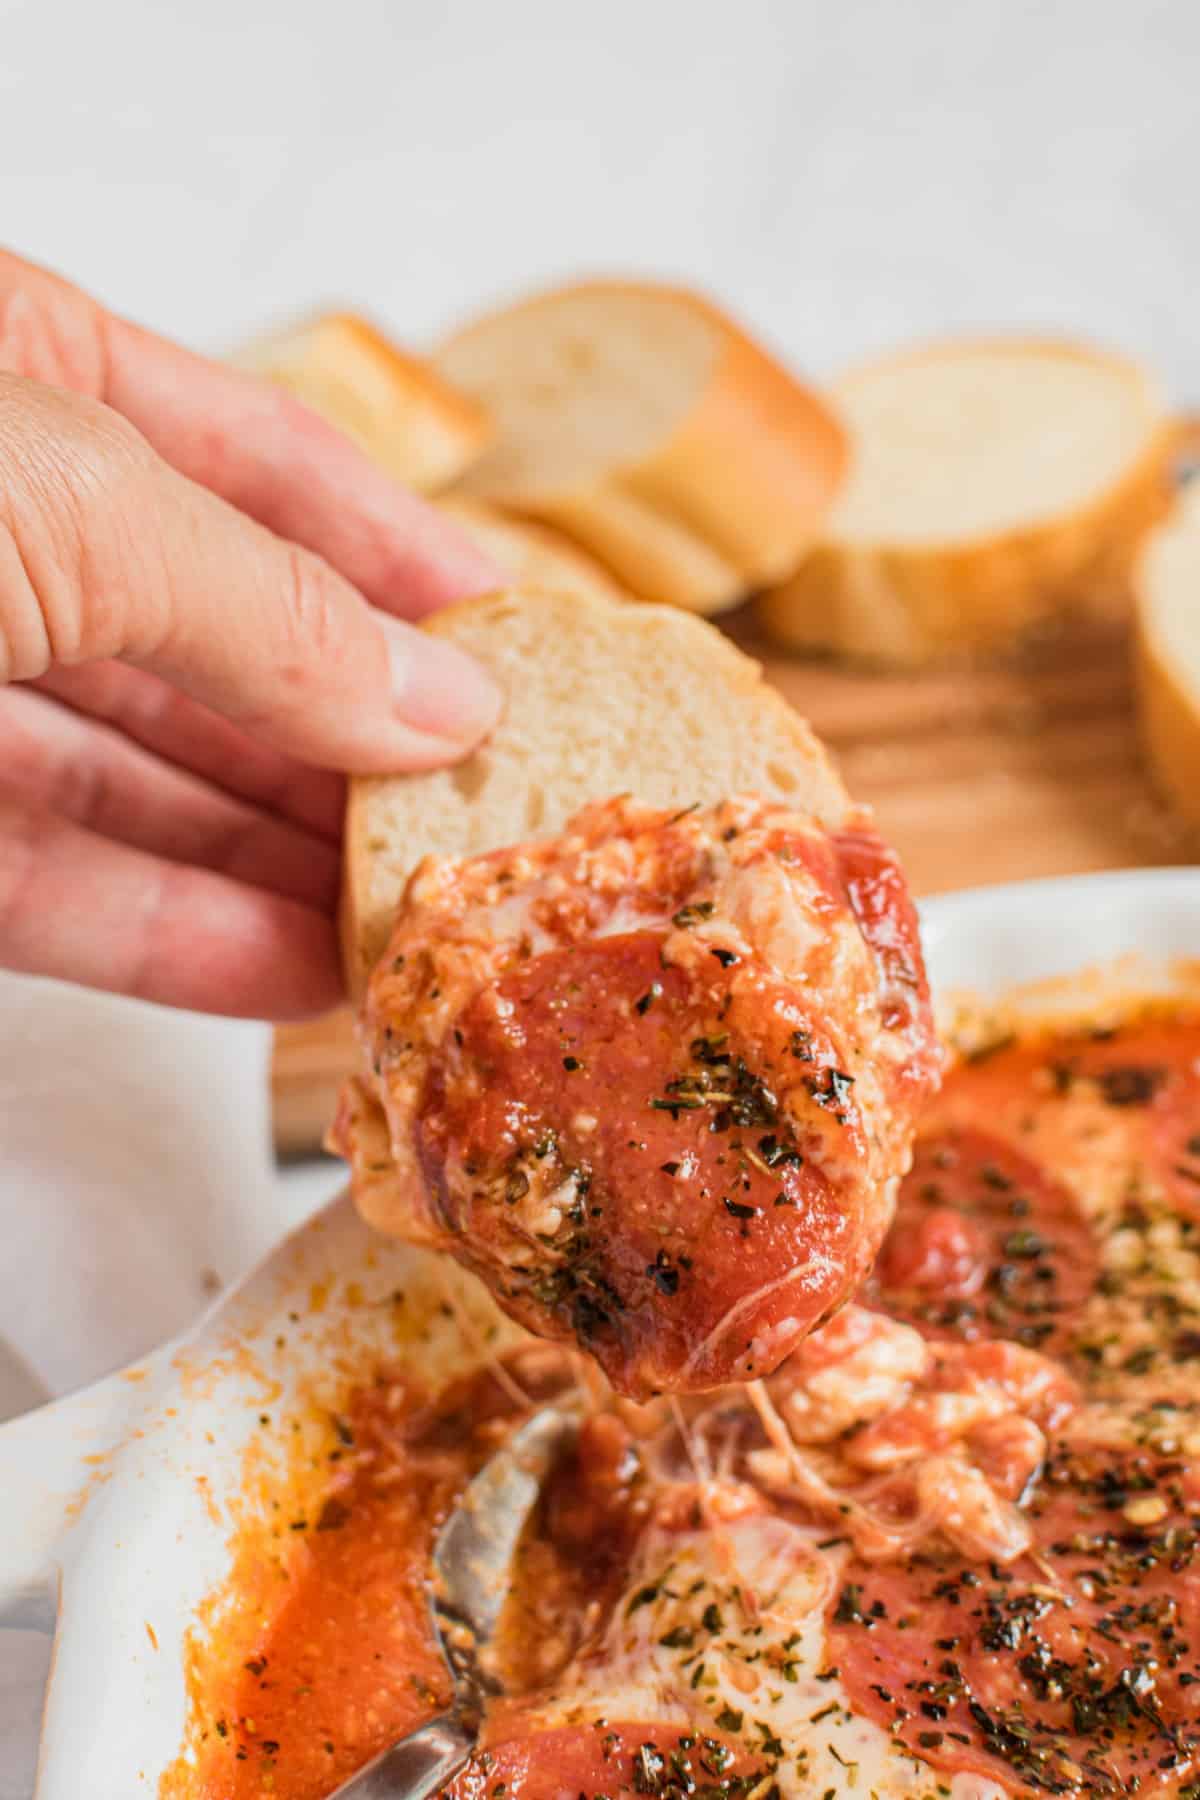 Slice of french bread being dipped in the pepperoni pizza dip.